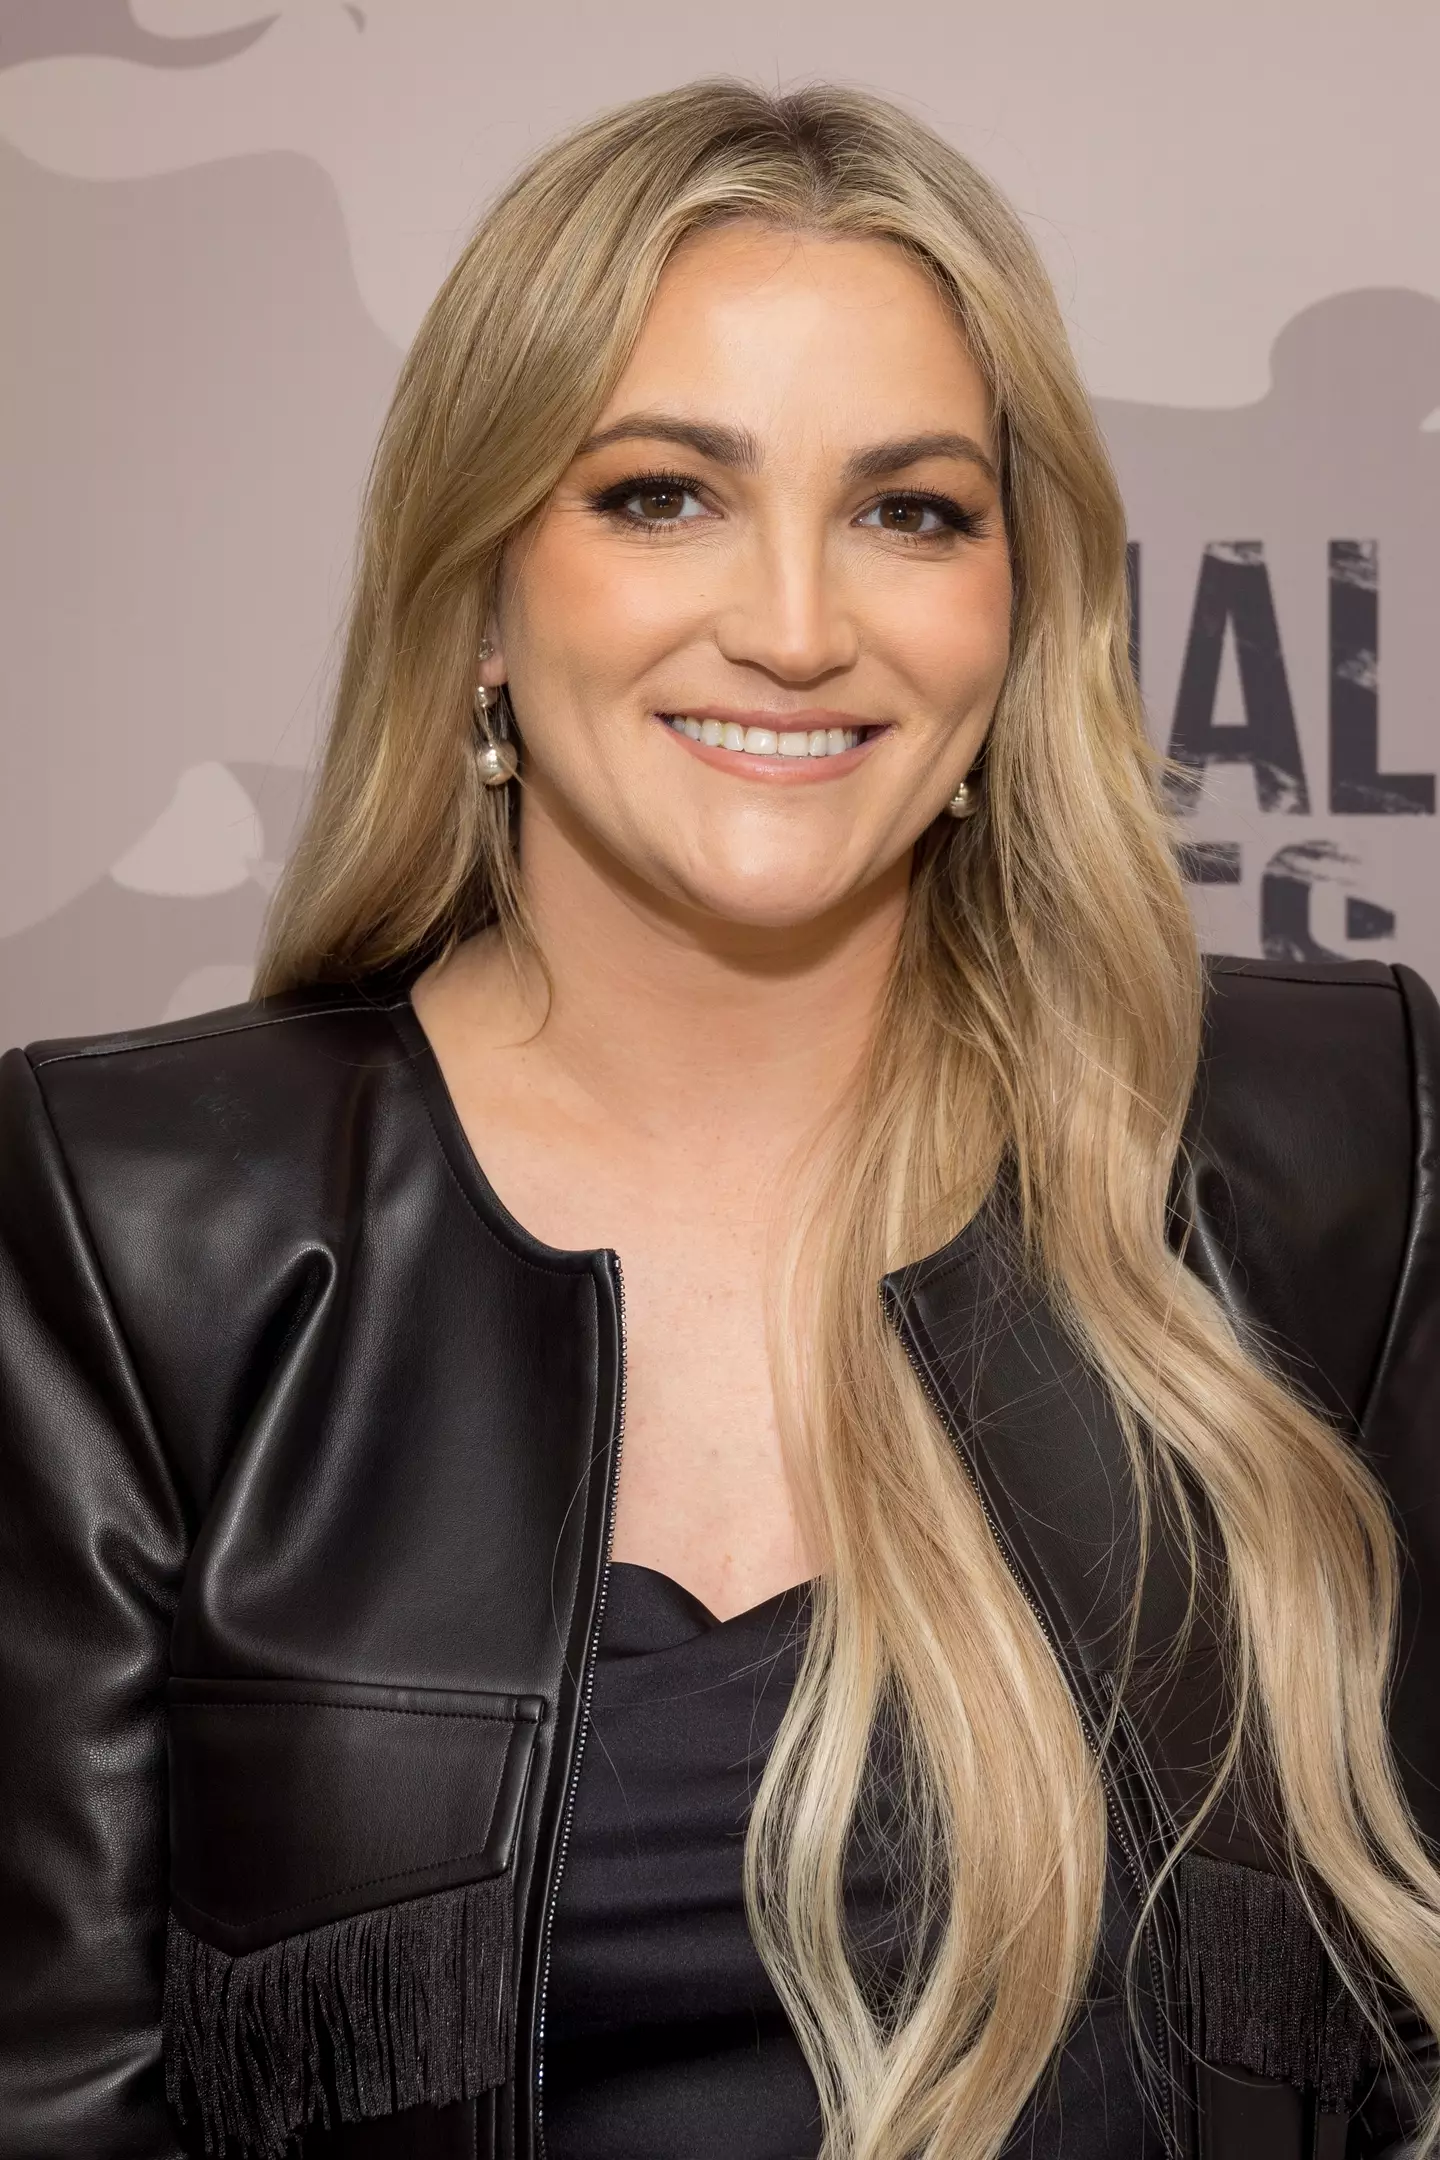 Jamie Lynn Spears will also be heading into the jungle.